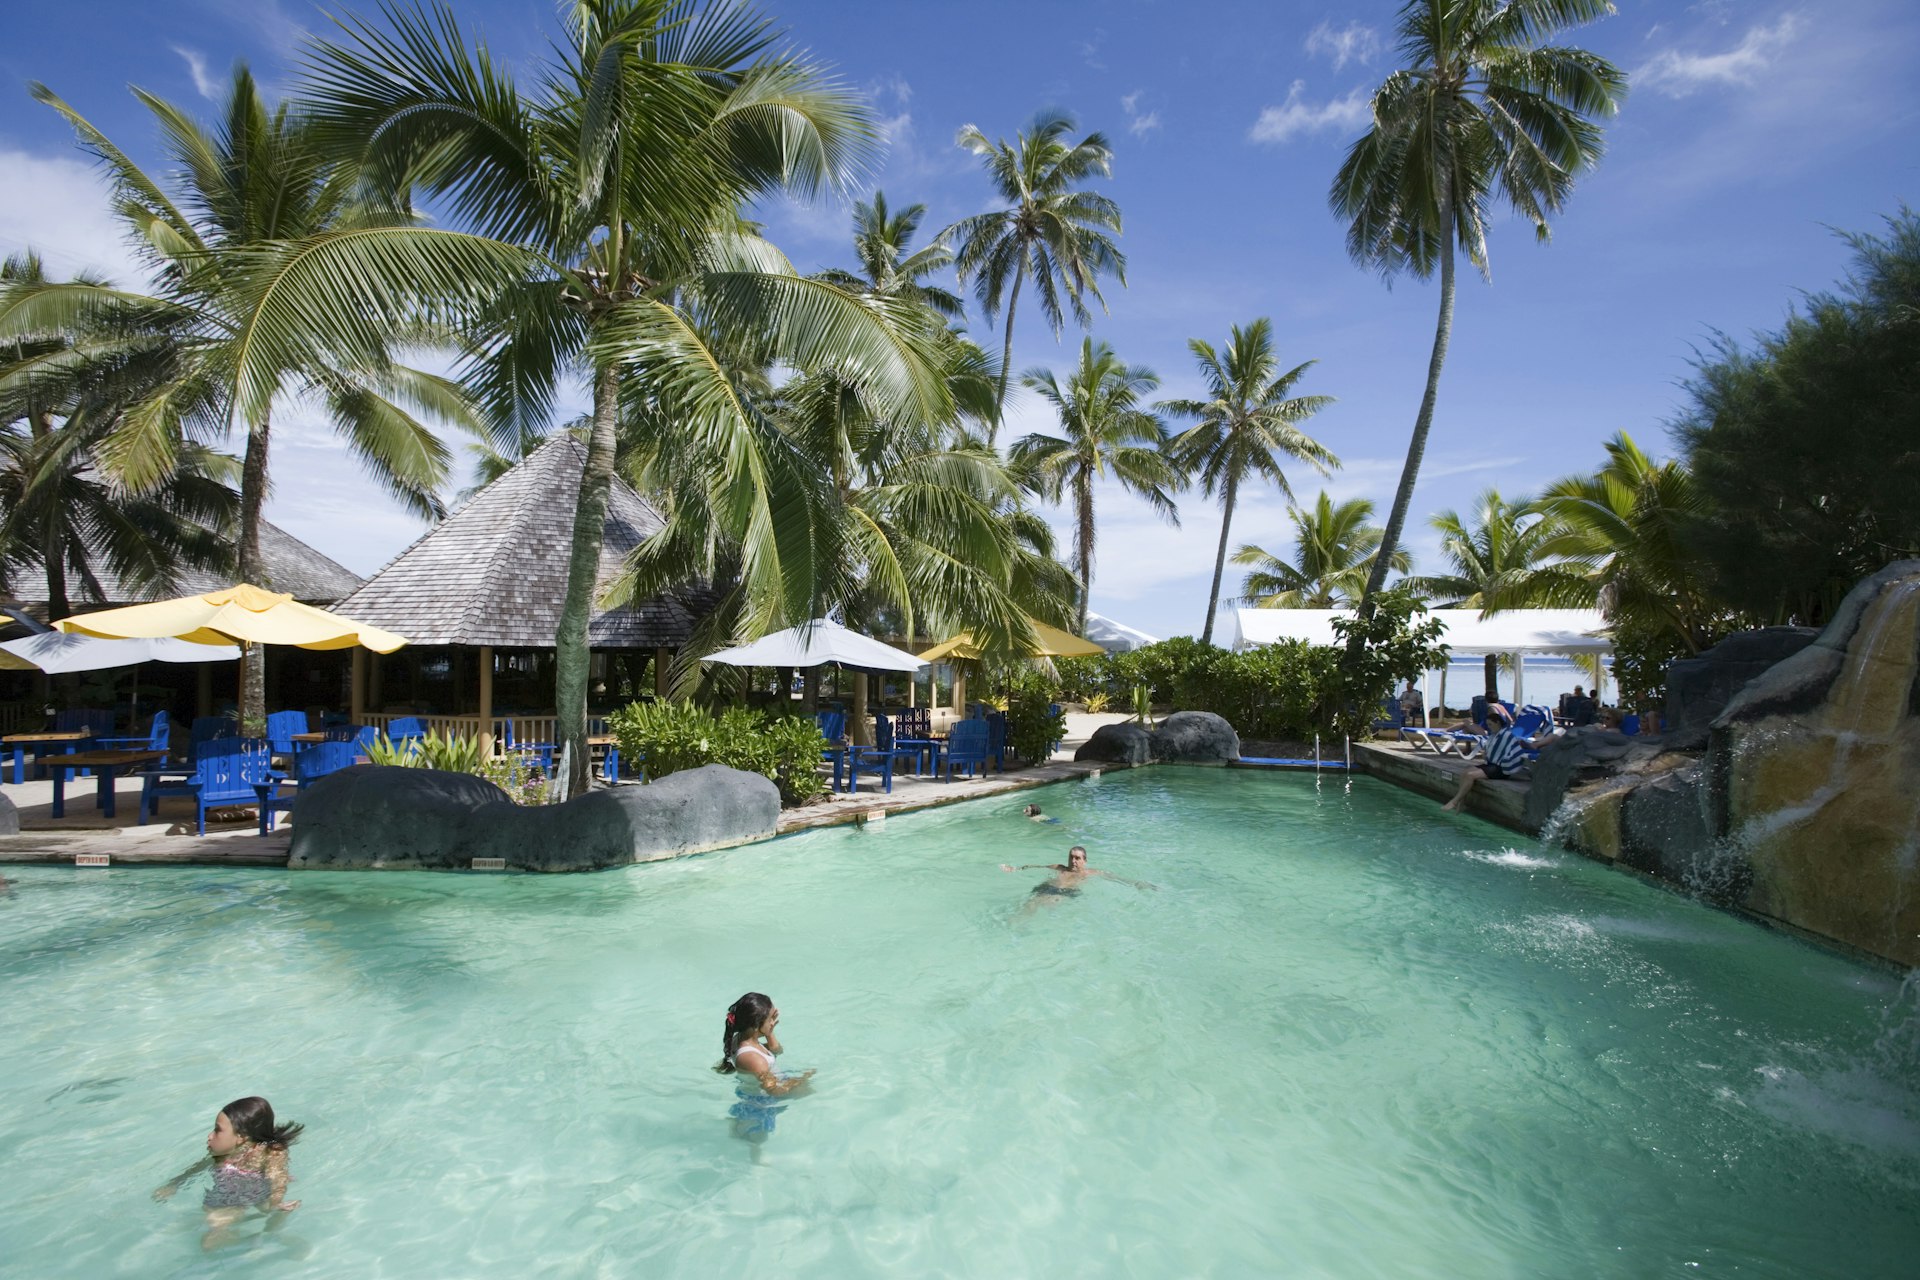 People swimming in the pool at Rarotongan Beach Resort on a clear day